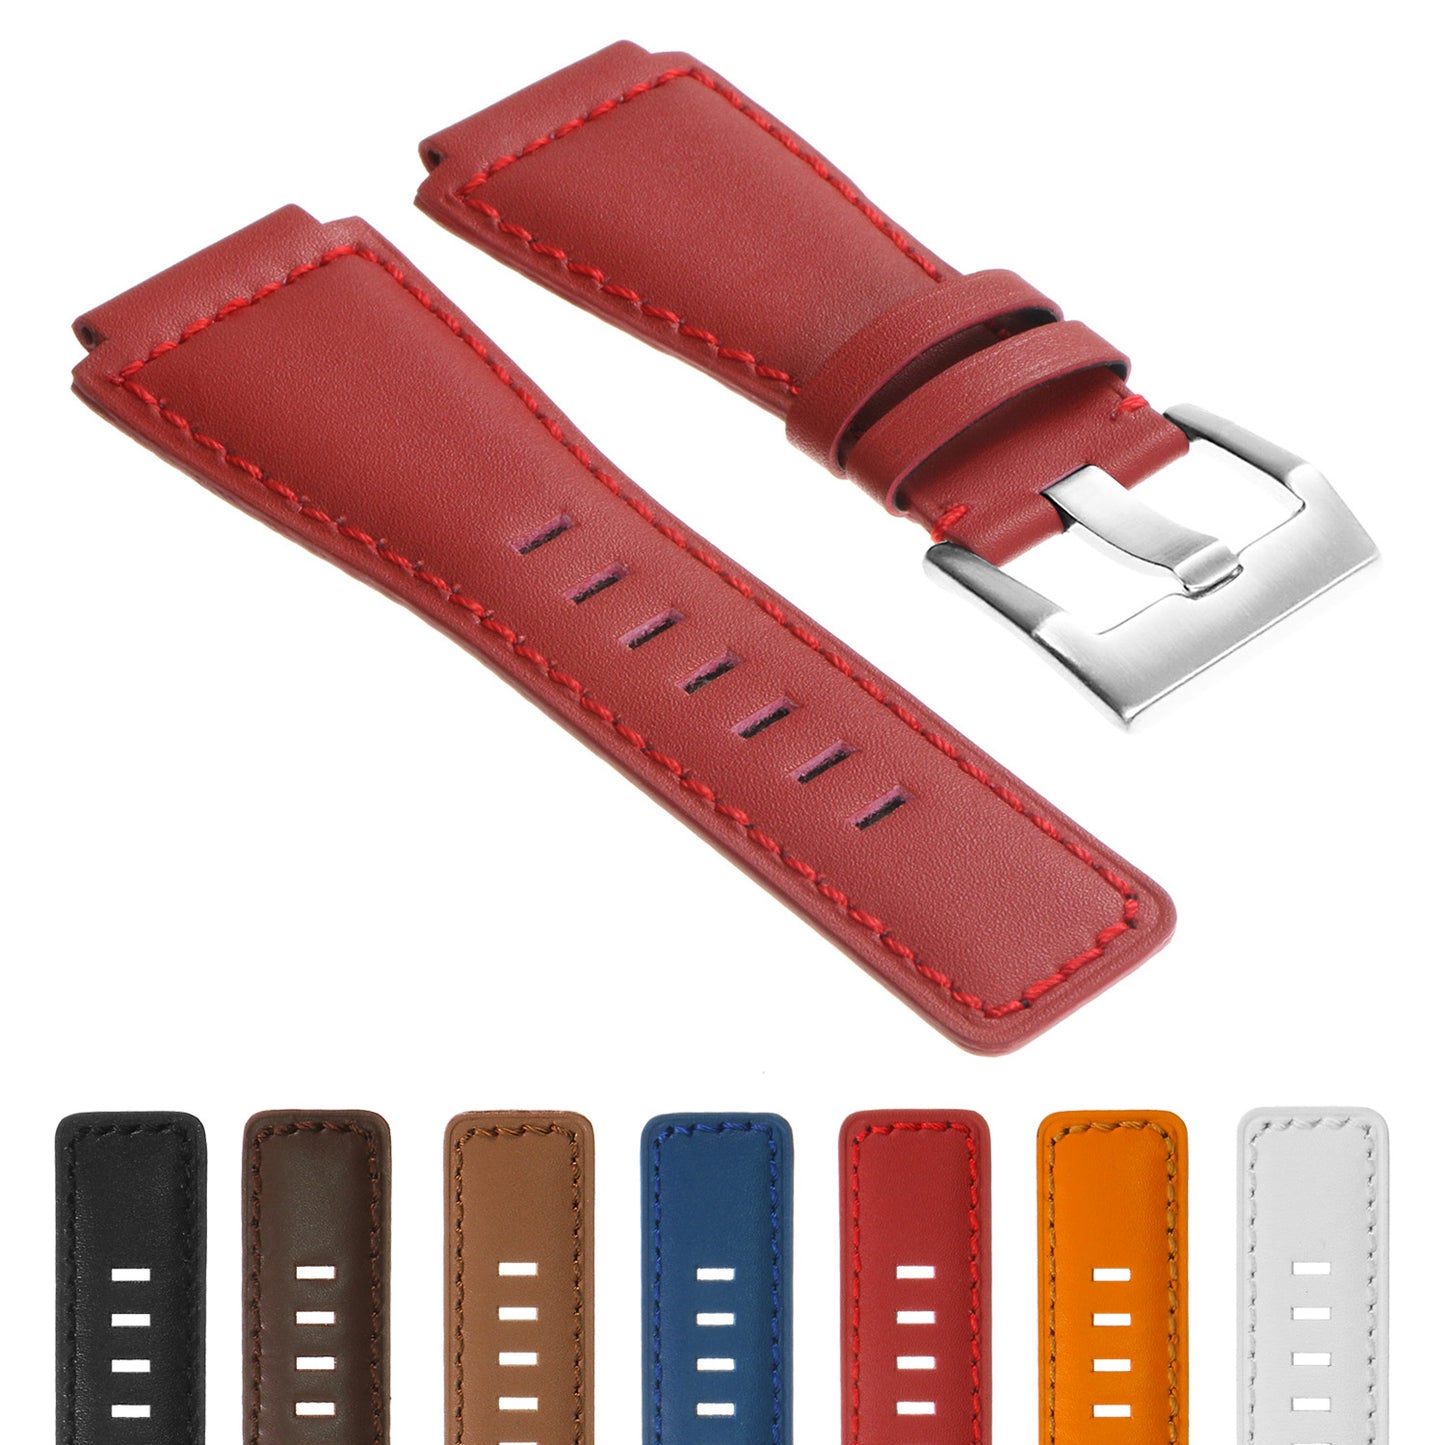 https://northstreetwatch.com/cdn/shop/products/br7.6.bs-Gallery-DASSARI-Leather-Watch-Strap-for-Bell-Ross-in-Red-with-Brushed-Steel-Buckle_81f1a93f-50e7-4401-b20f-17bf56ebcdc2_1445x.jpg?v=1645118838